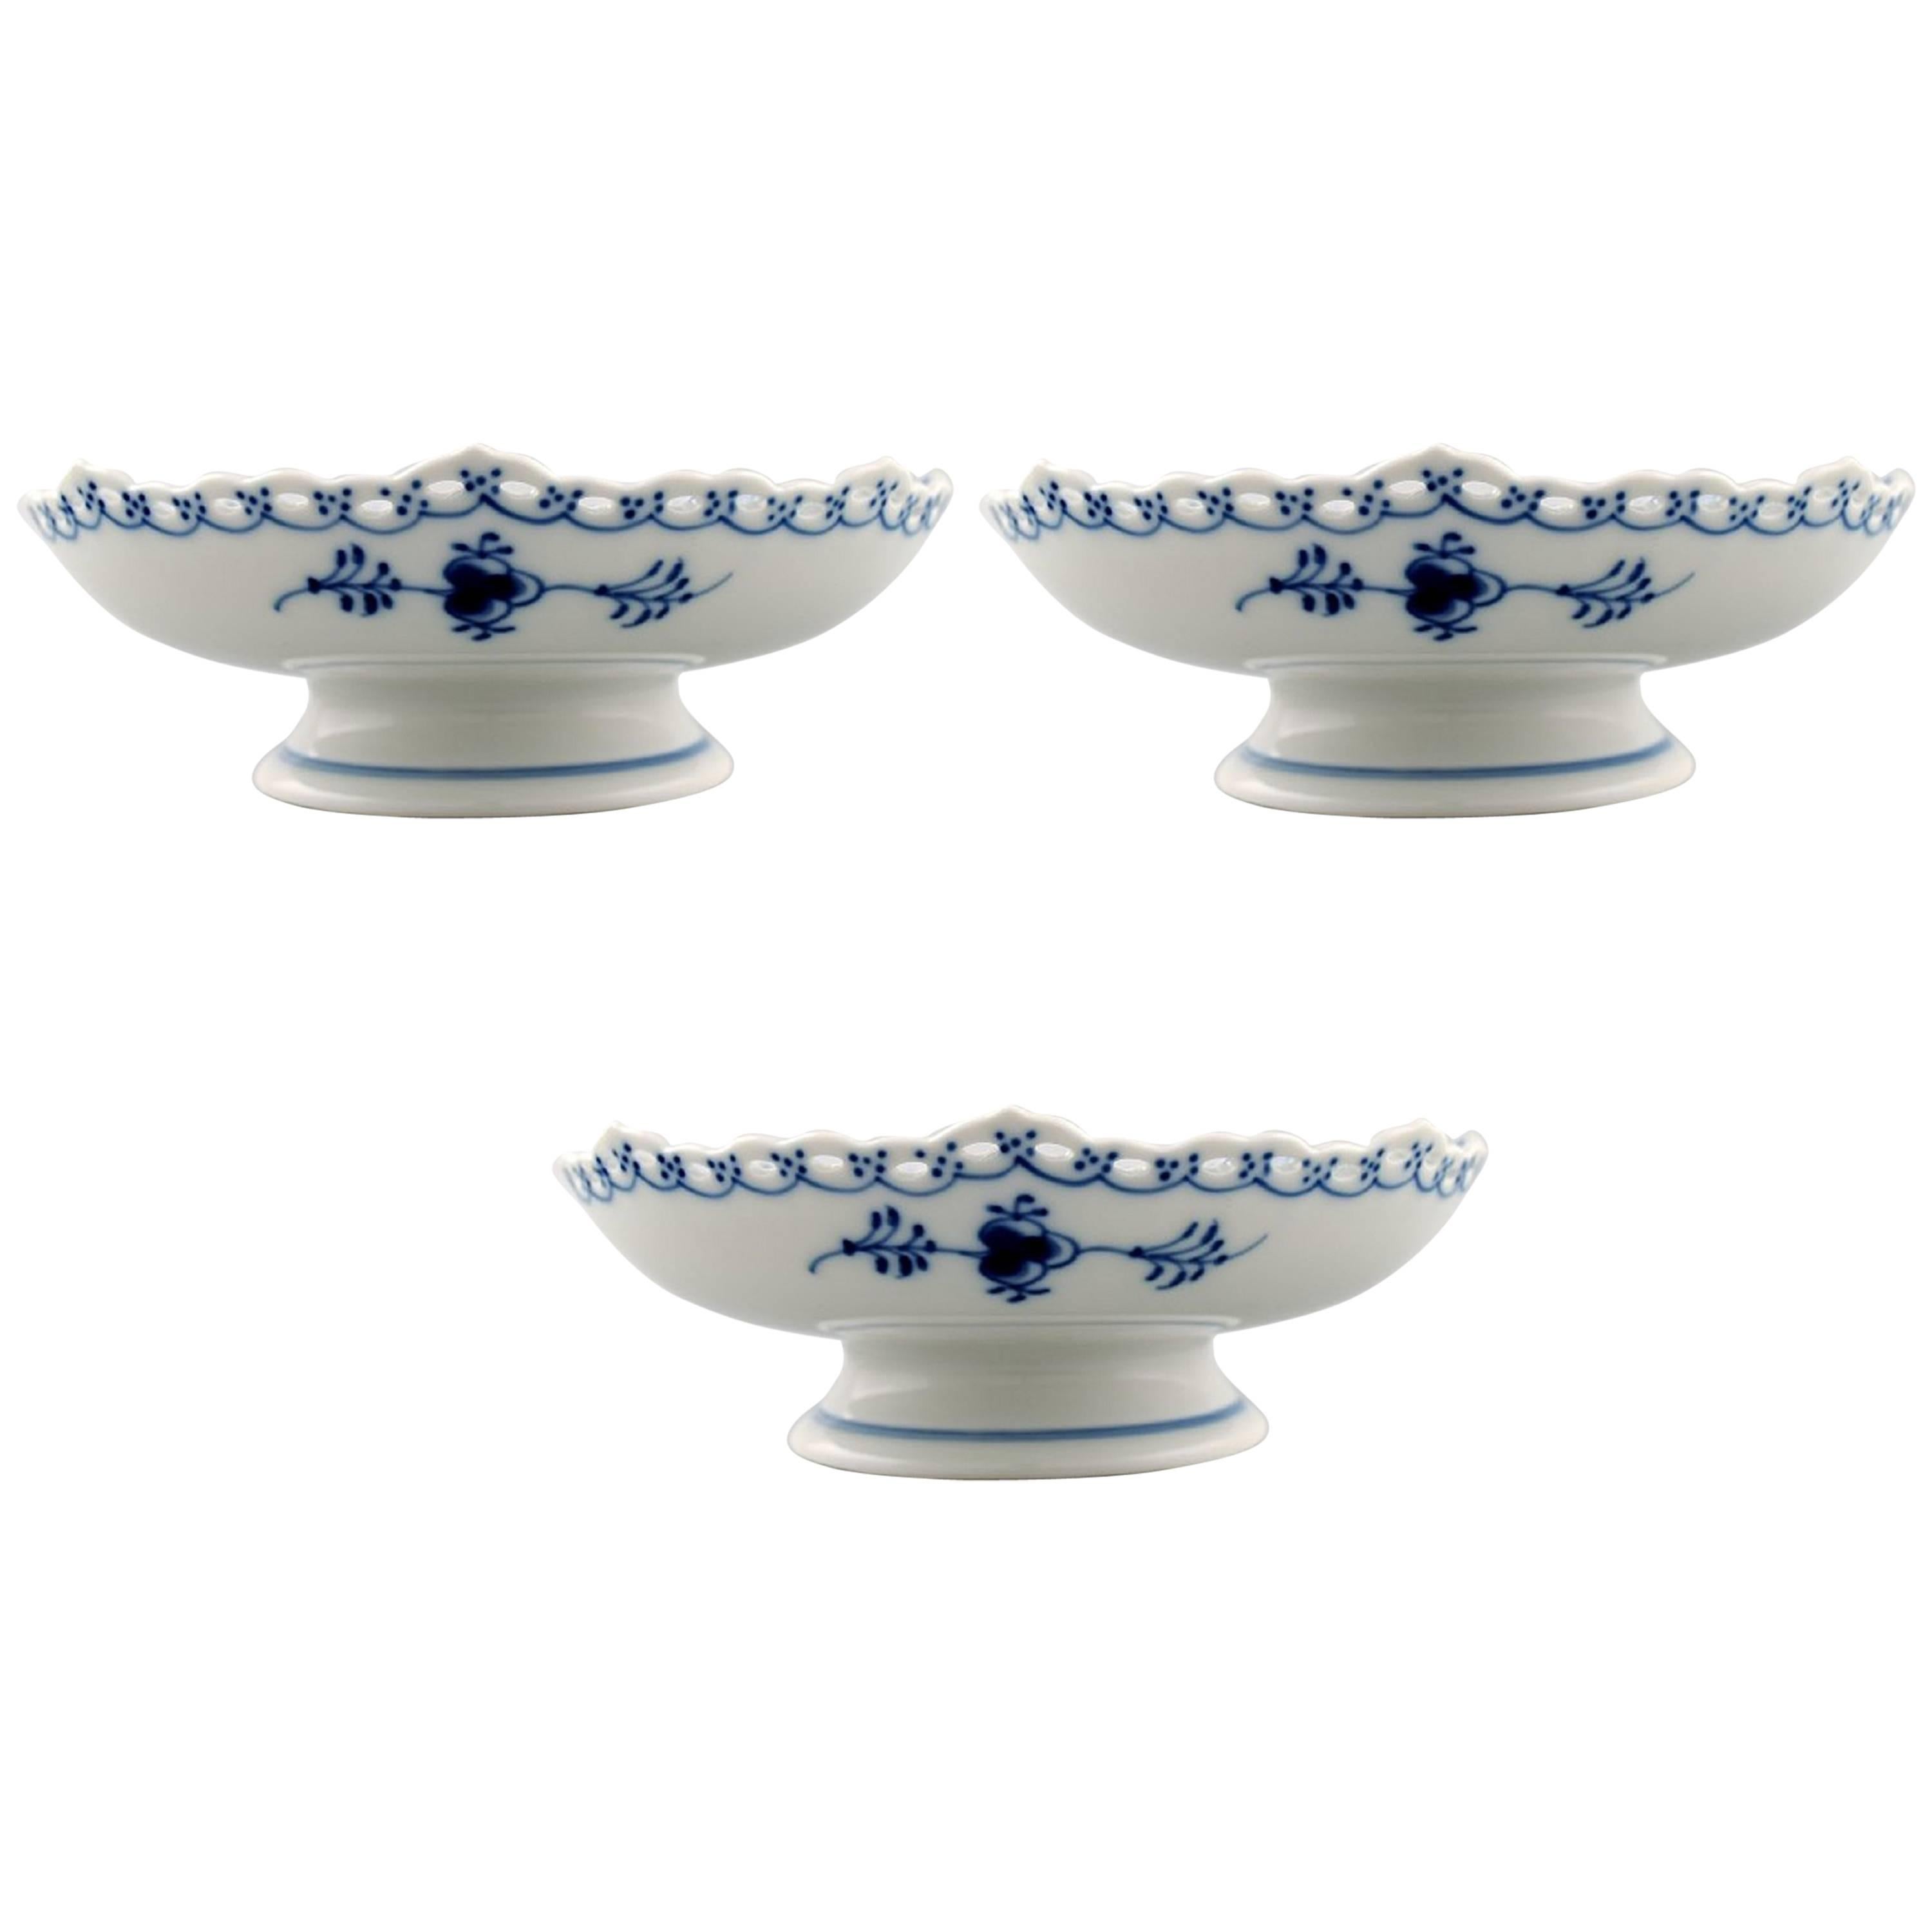 Three Bowls Royal Copenhagen Blue Fluted Full Lace, Low Bowl on Foot